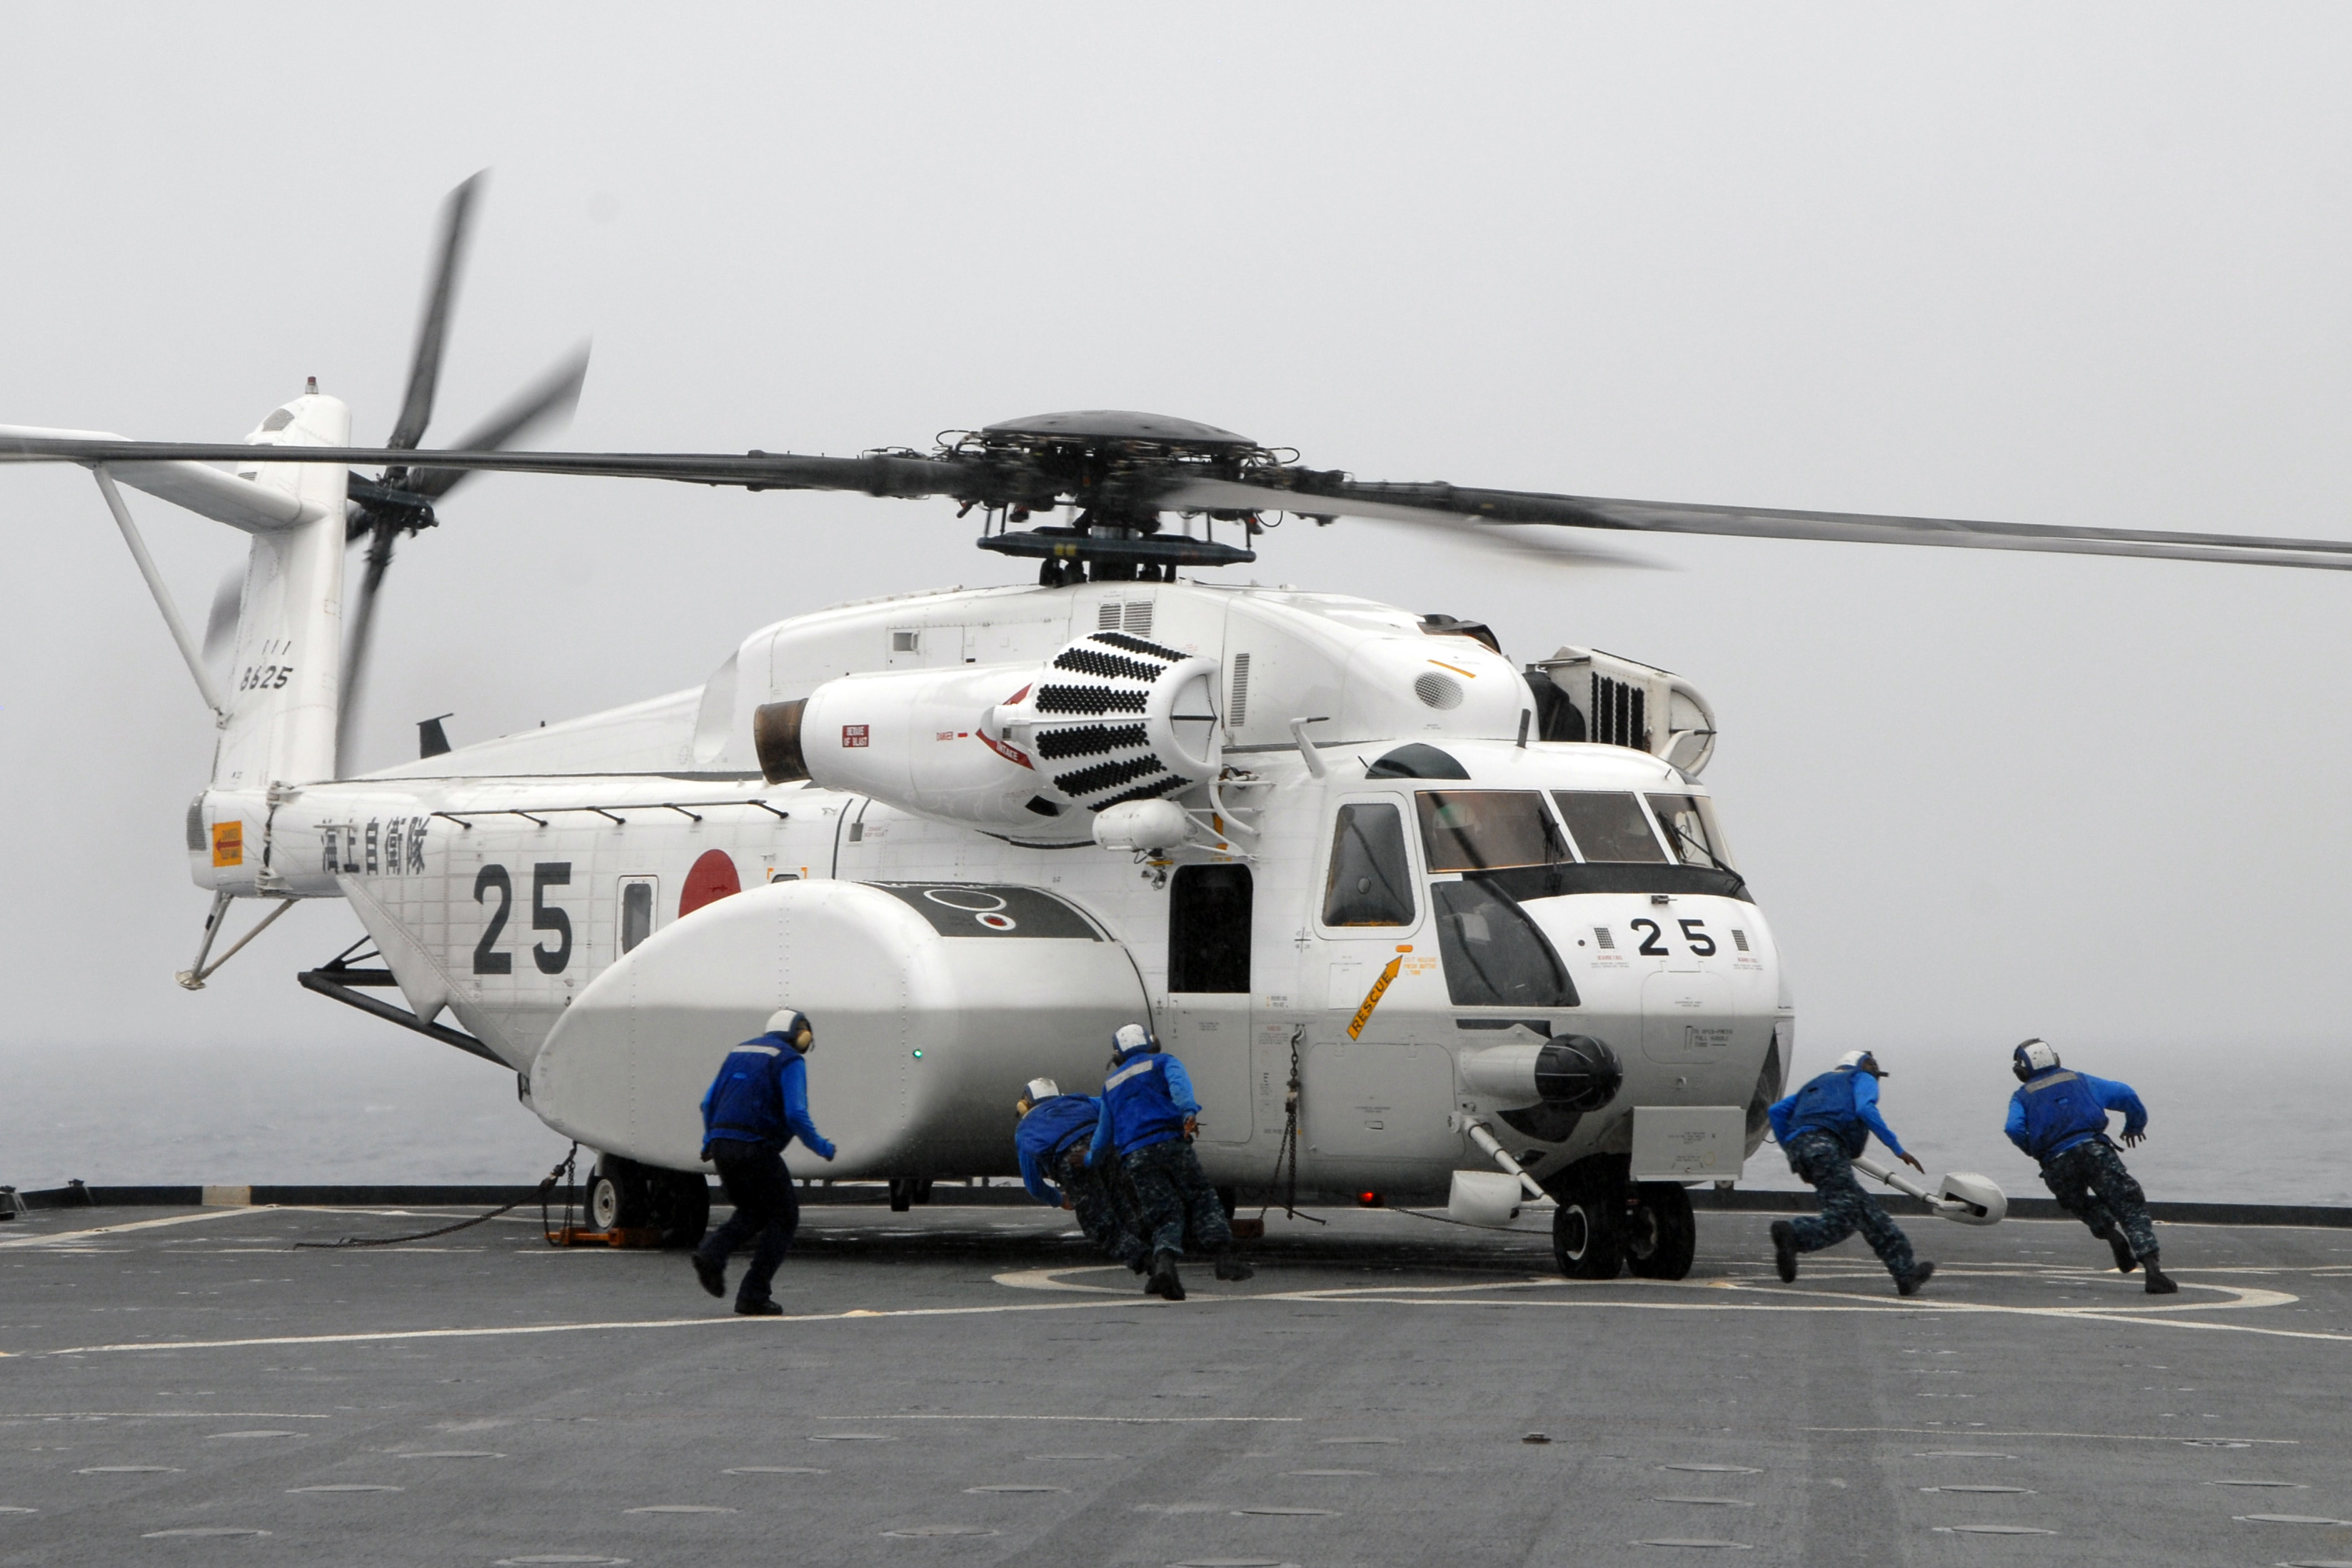 US_Navy_111031-N-JL506-553_An_MH-53E_Super_Stallion_helicopter_from_the_Japan_Maritime_Self-Defense_Force_%28JMSDF%29_Helicopter_Mine_Squadron_111_land.jpg